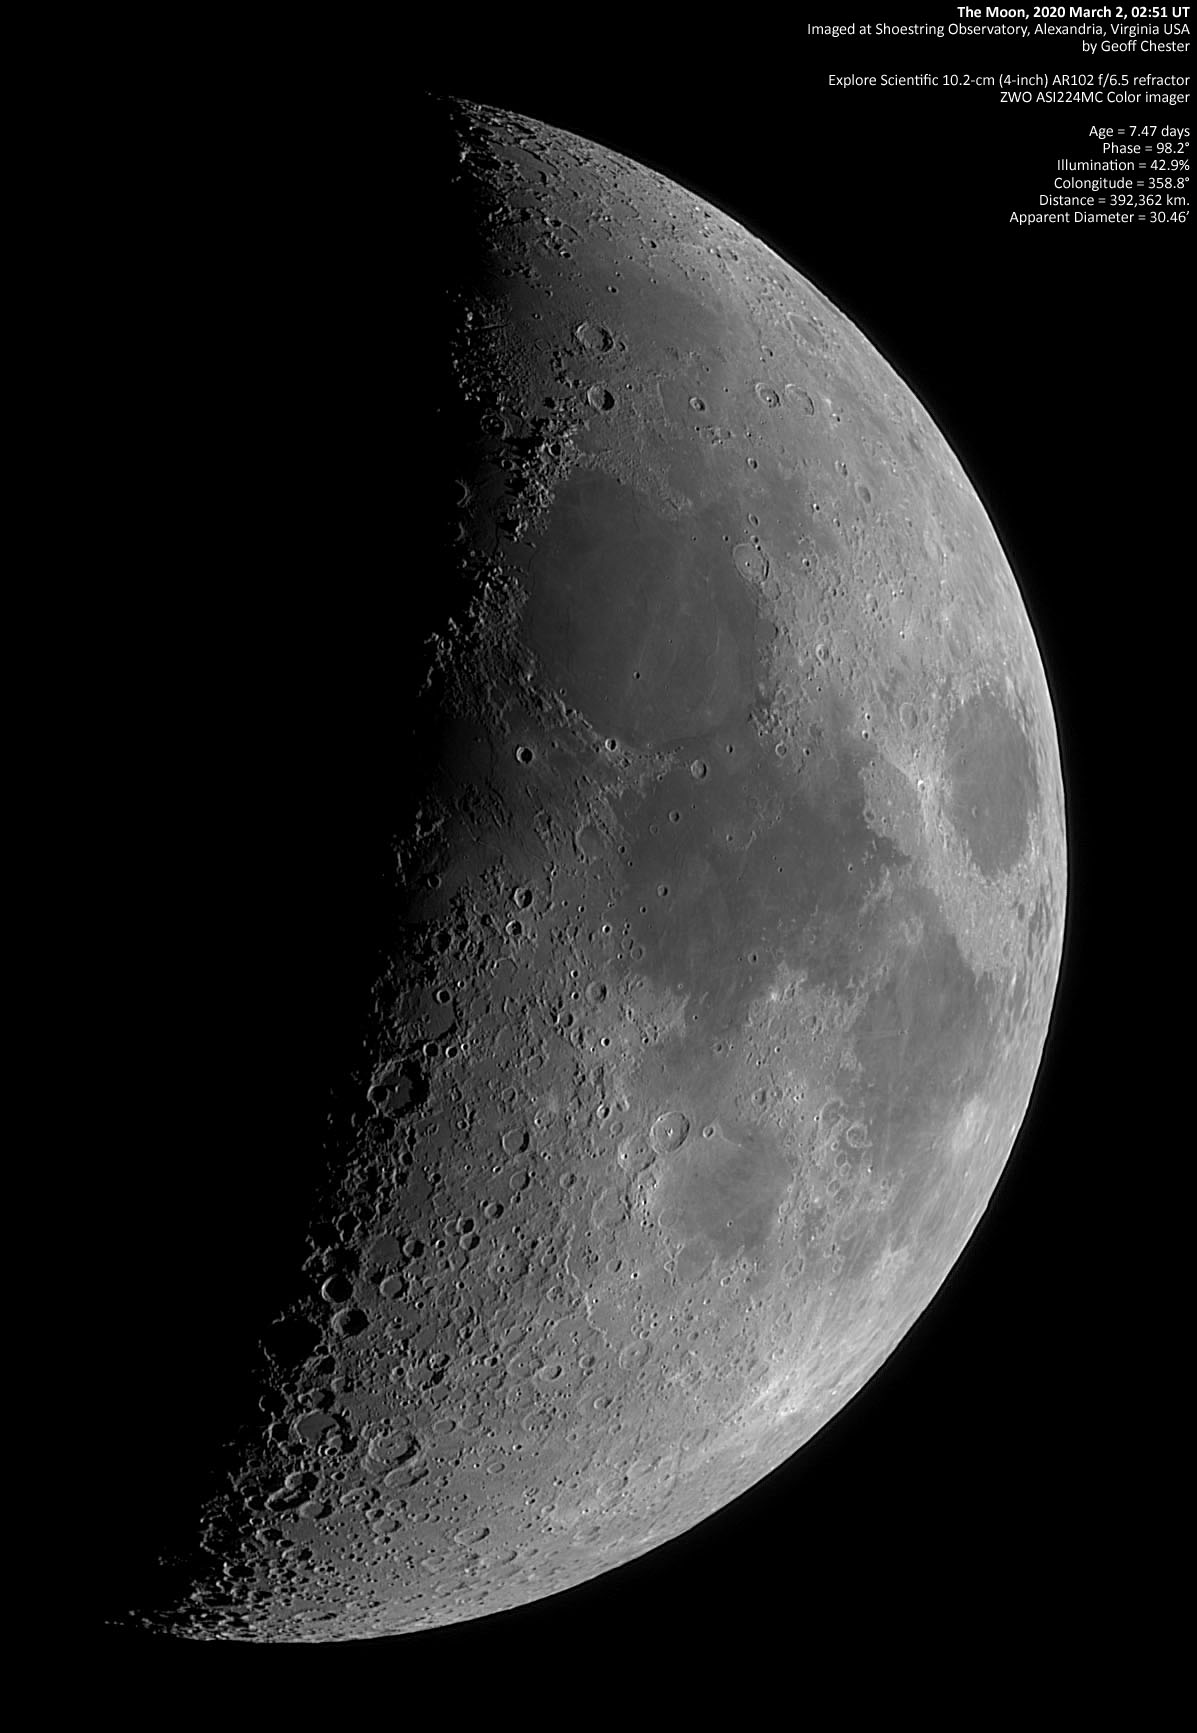 The Moon, 2020 March 2, 02:51 UT